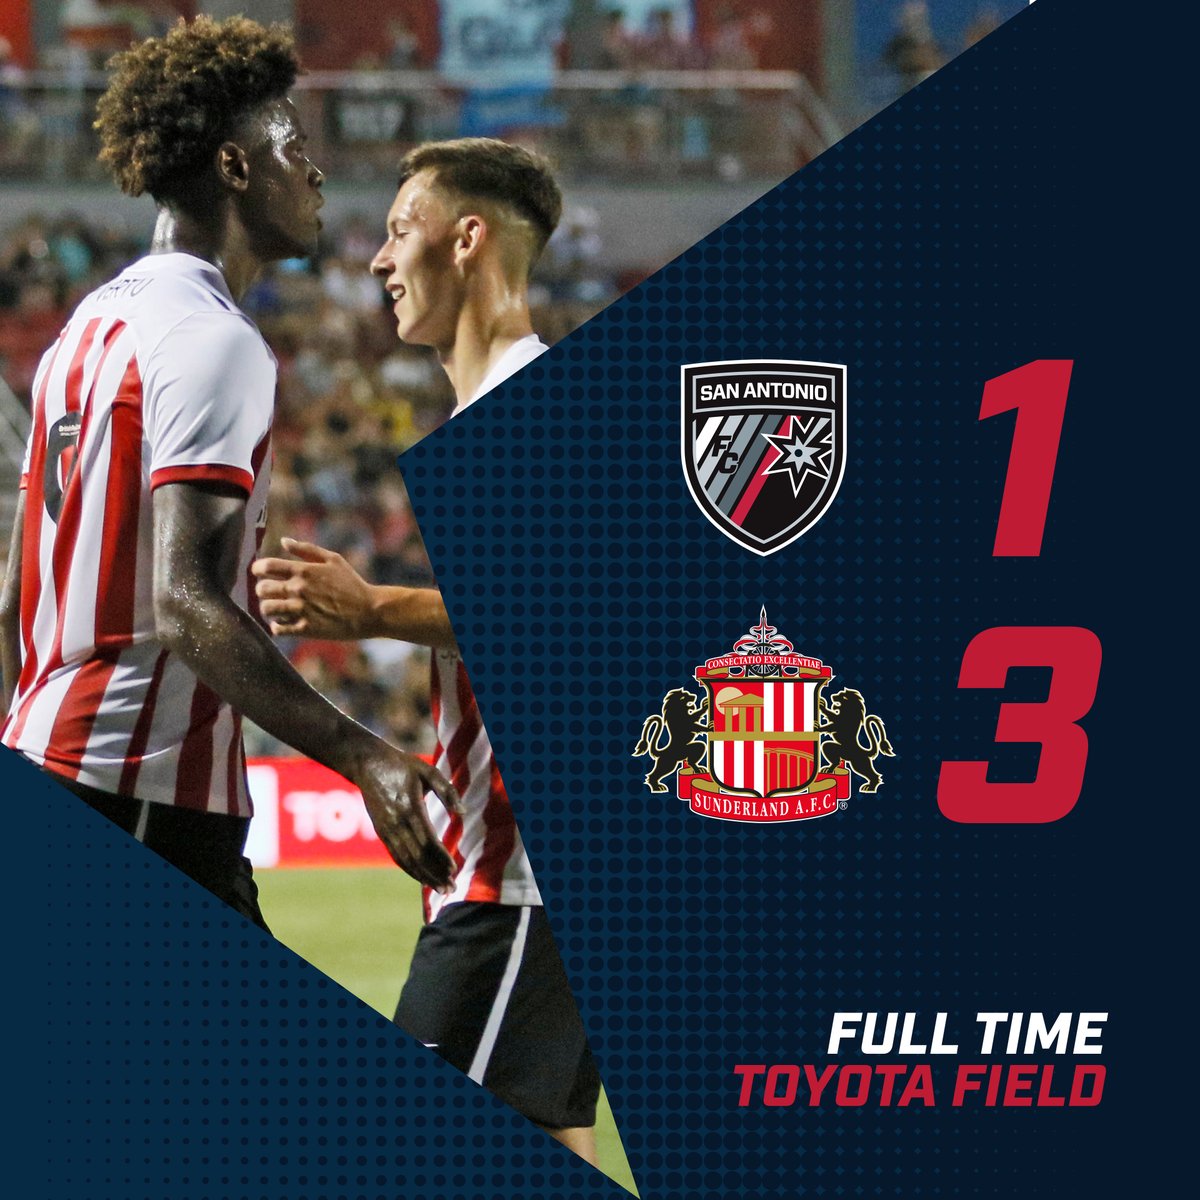 Starting our tour of the USA with a win 👊 #SAFC